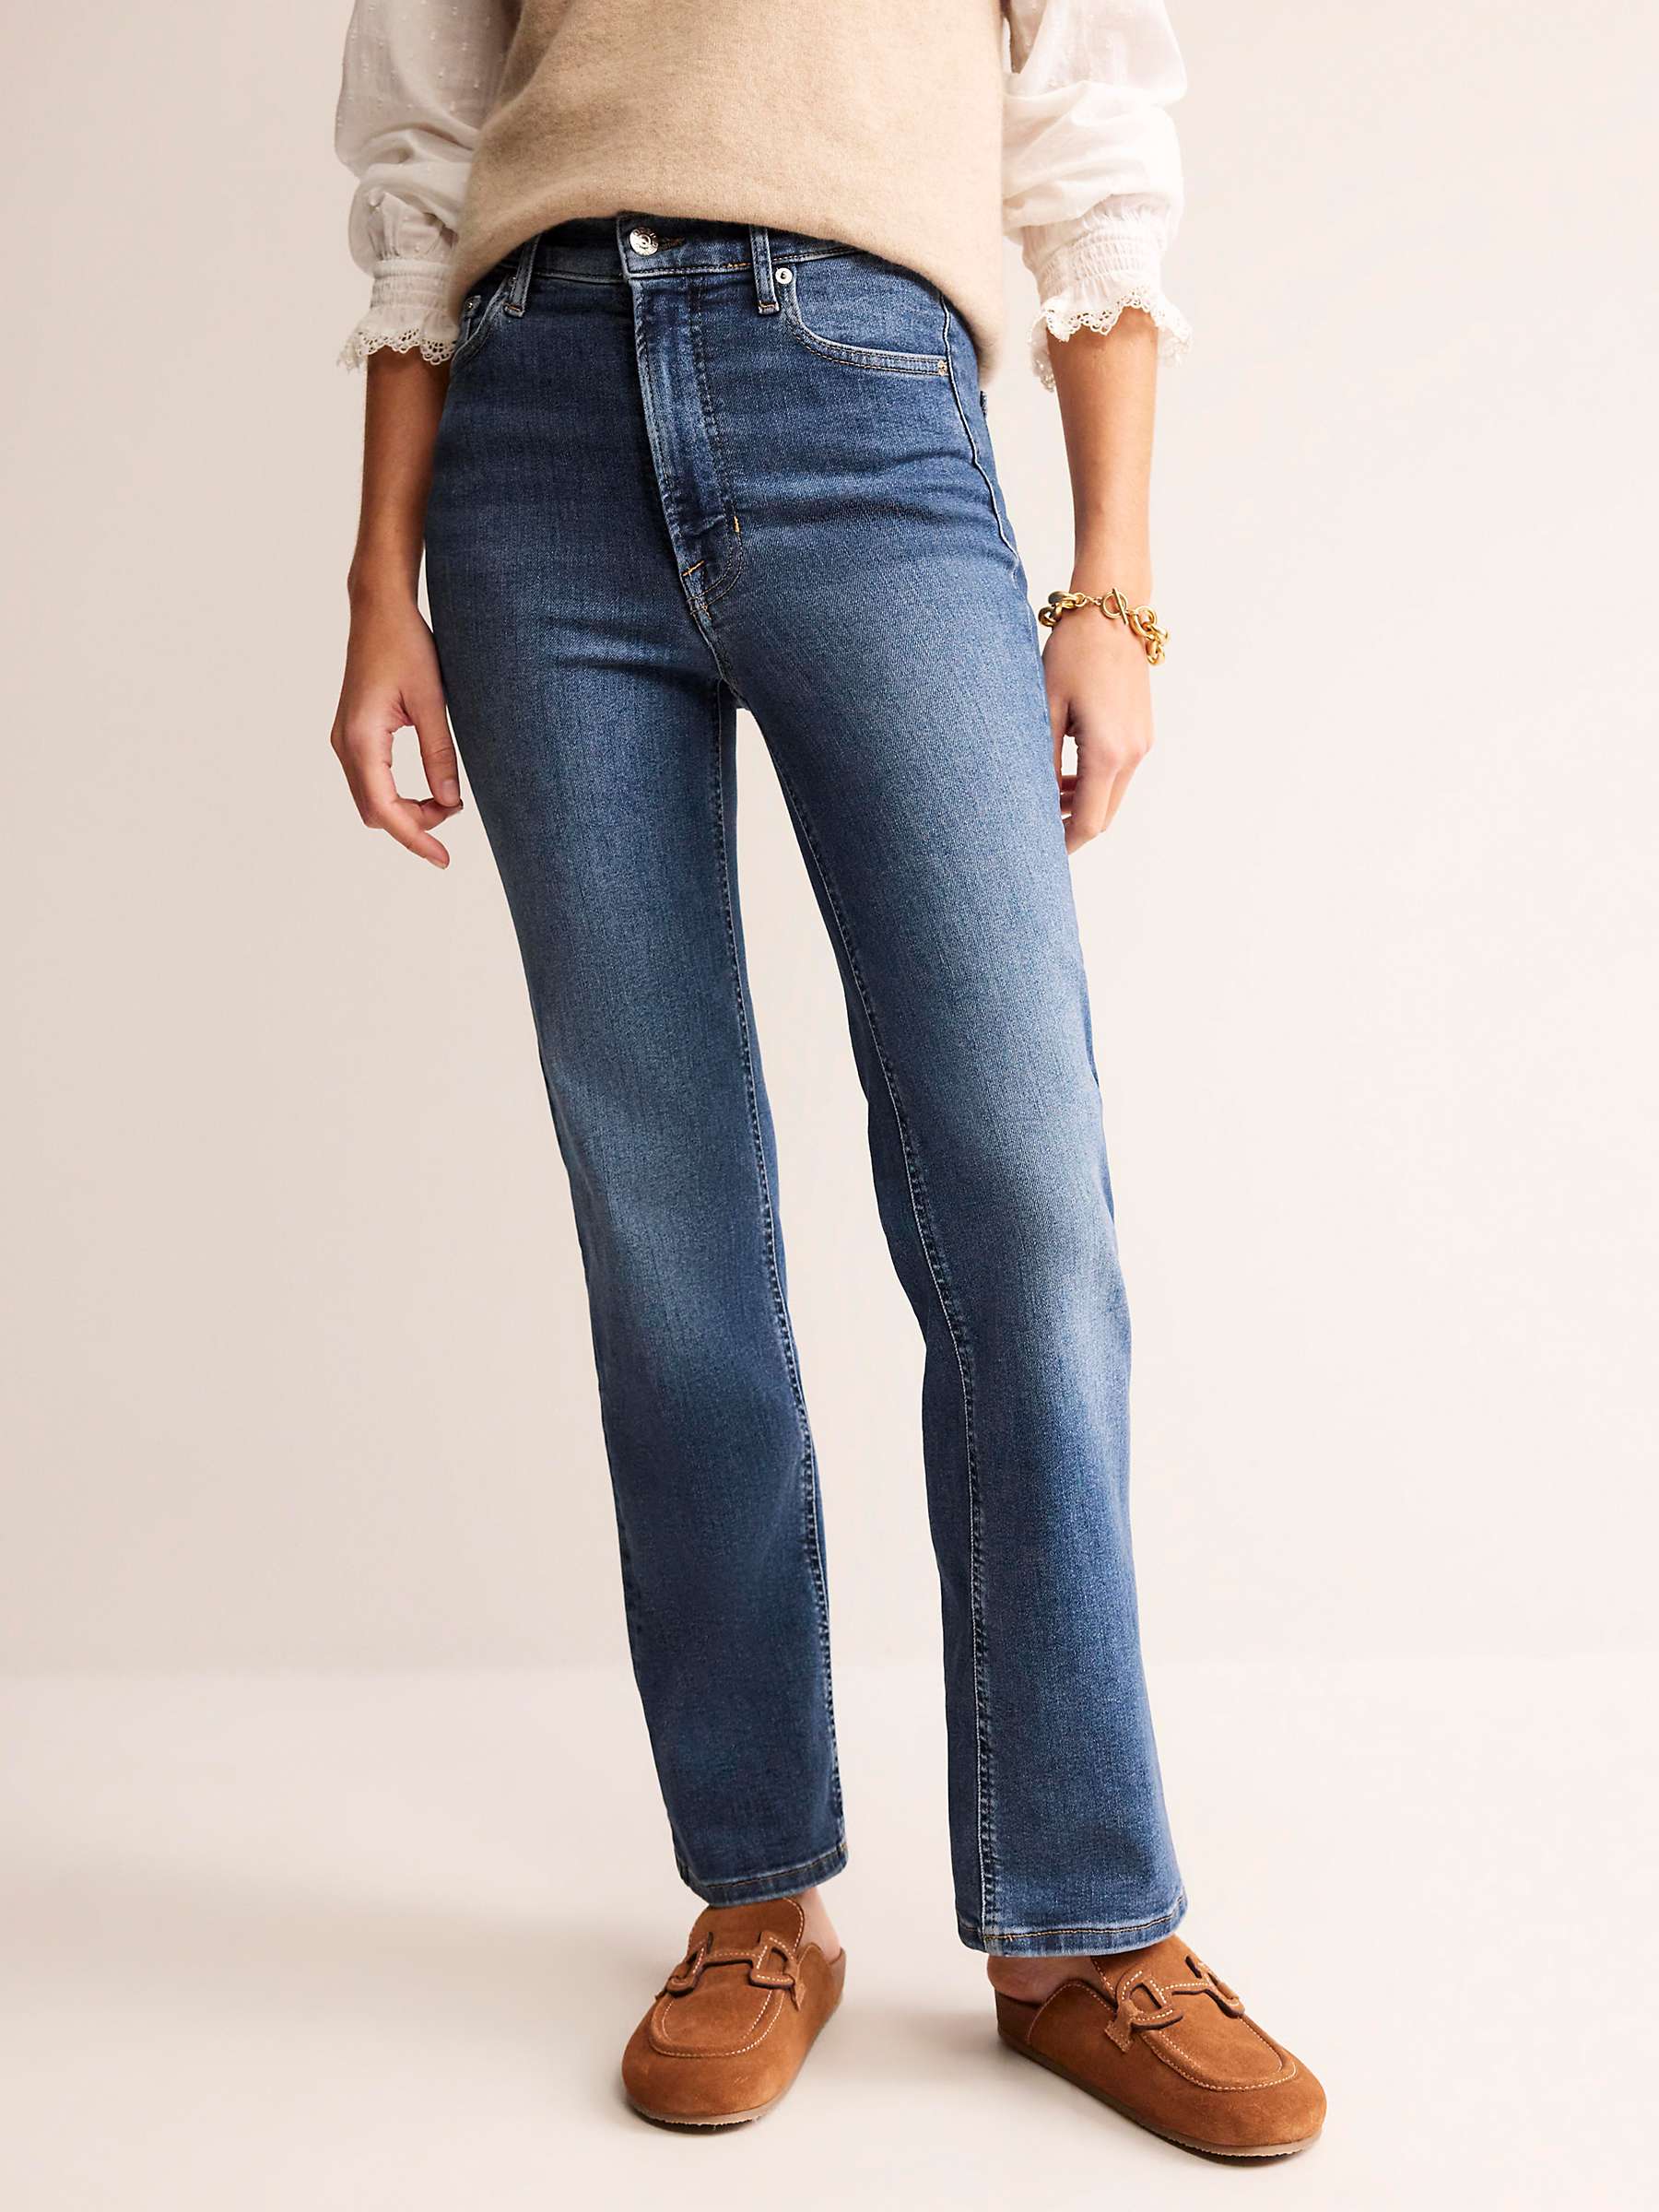 Buy Boden High Rise Power Stretch Straight Cut Jeans, Mid Vintage Online at johnlewis.com